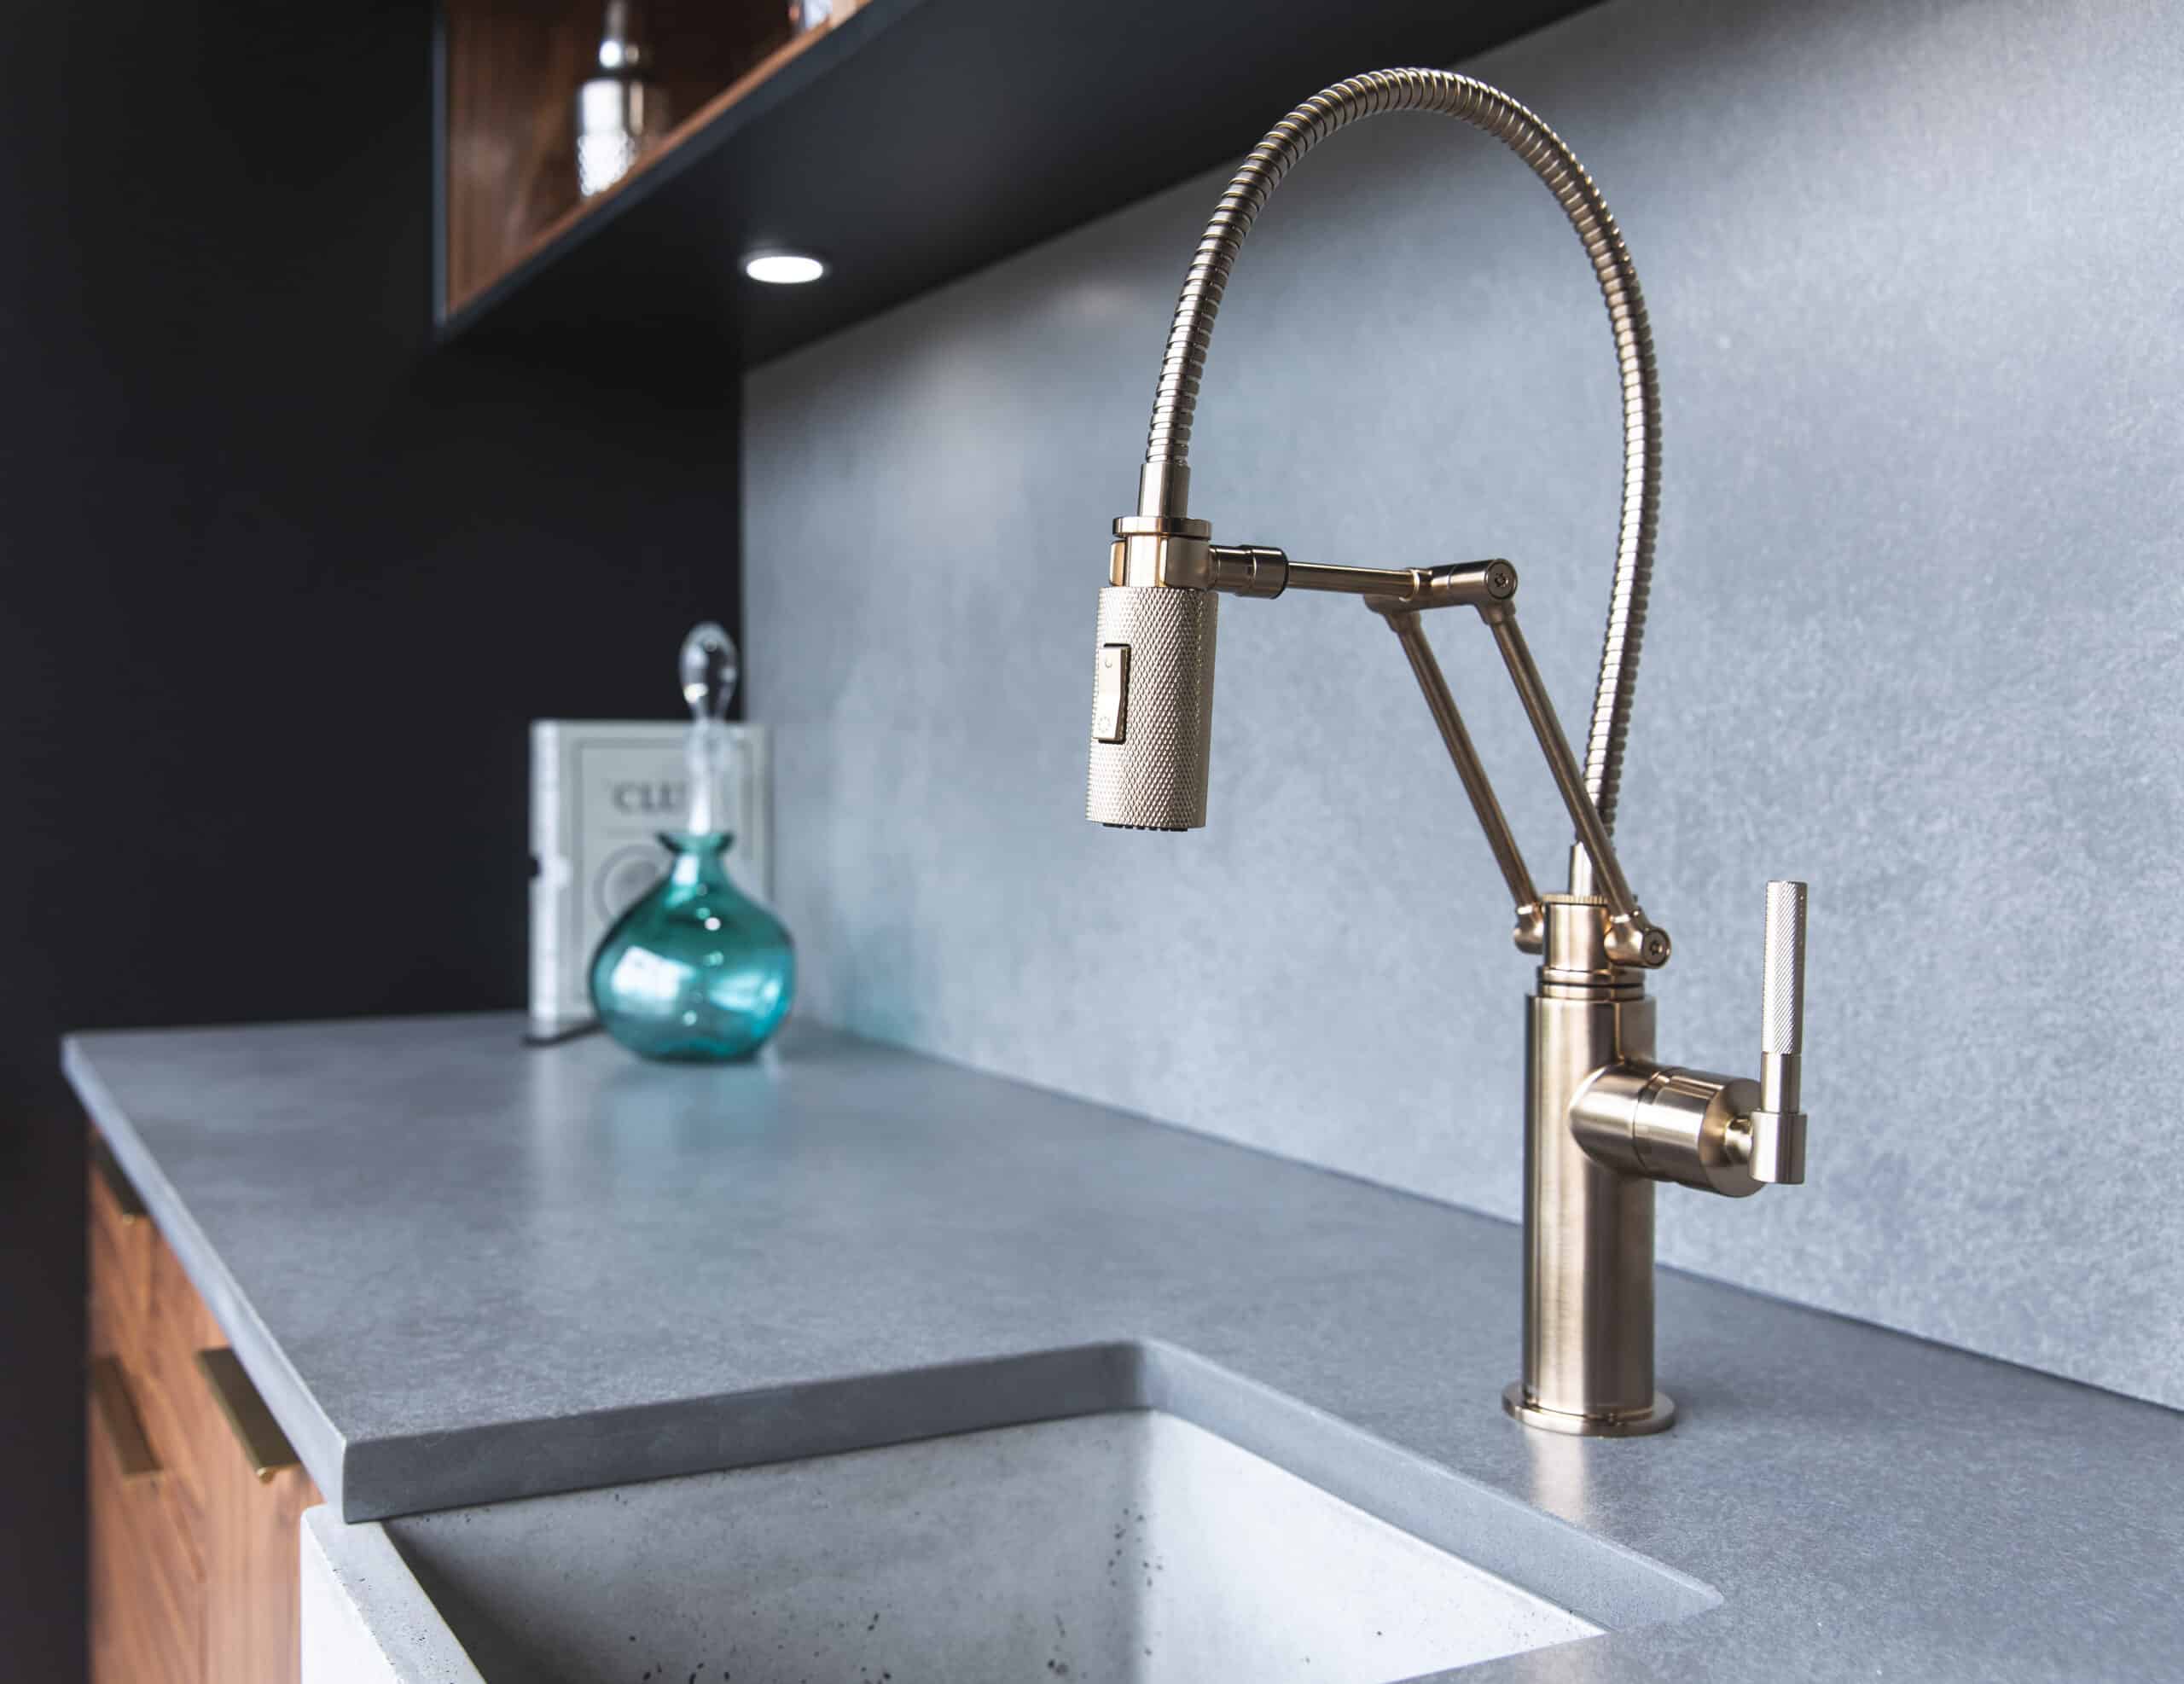 A modern kitchen sink with a brass faucet, adding elegance and functionality to any contemporary kitchen